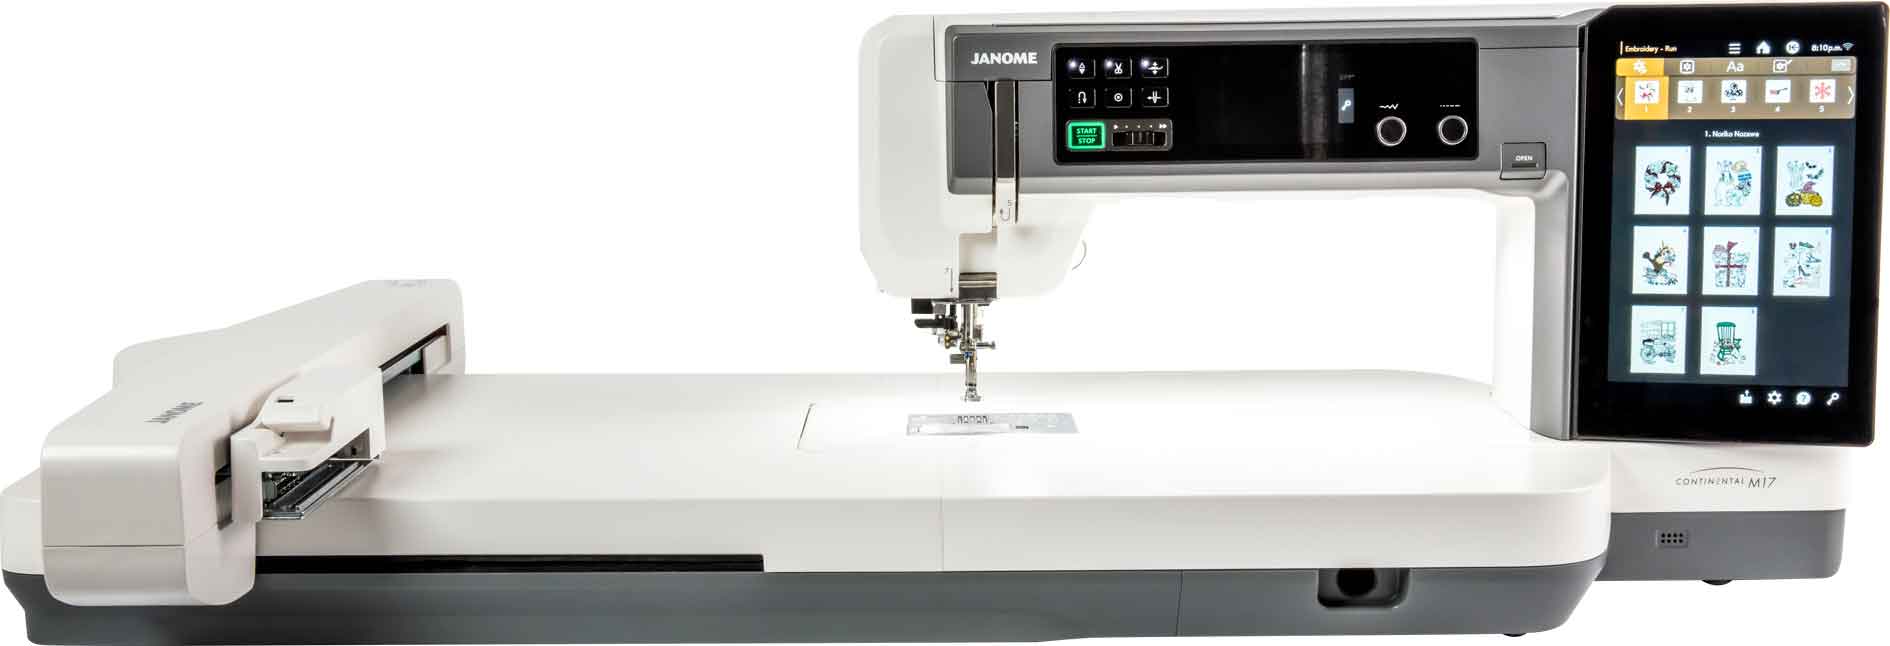 front facing image of the Janome Continental M17 Sewing and Embroidery Machine with table attached